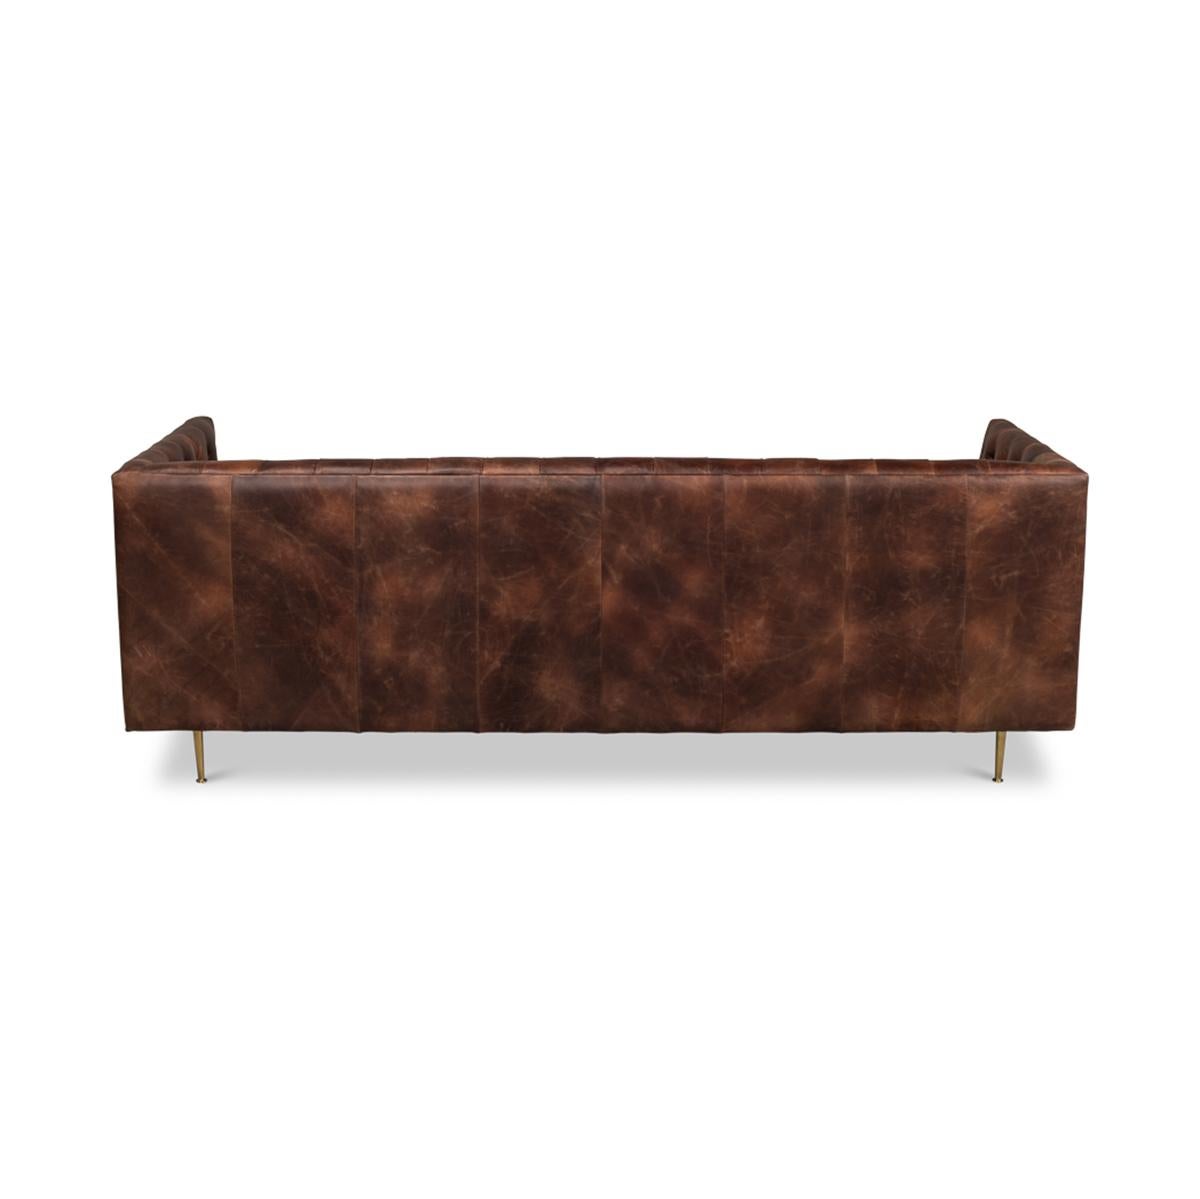 Asian Mid Century Tufted Leather Sofa For Sale